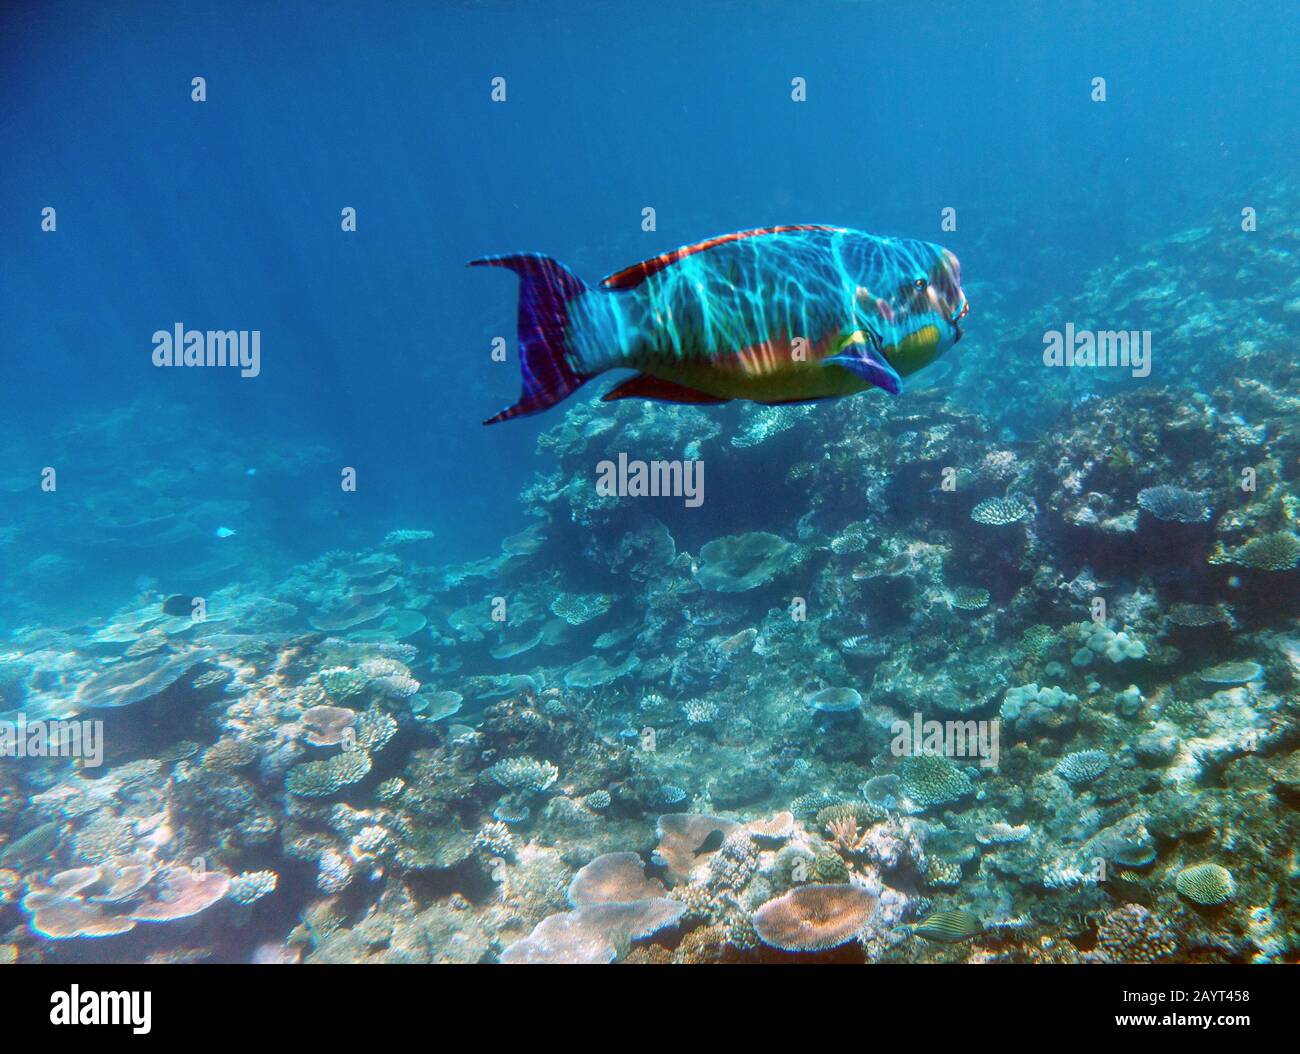 Parrotfish with light ripples from water's surface, Great Barrier Reef, Queensland, Australia Stock Photo